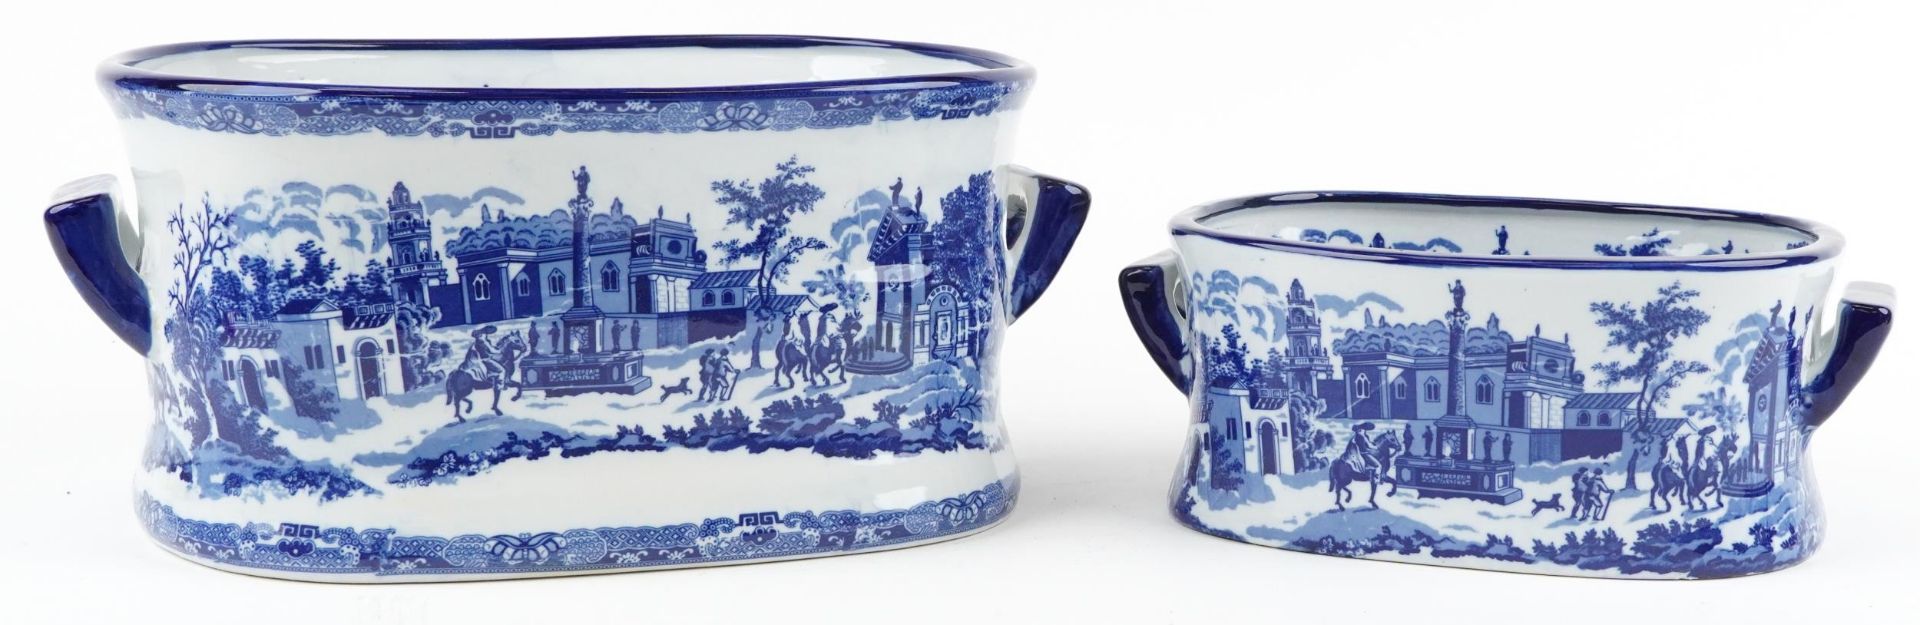 Two blue and white porcelain planters with twin handles, each decorated with cavaliers on horseback, - Image 3 of 4